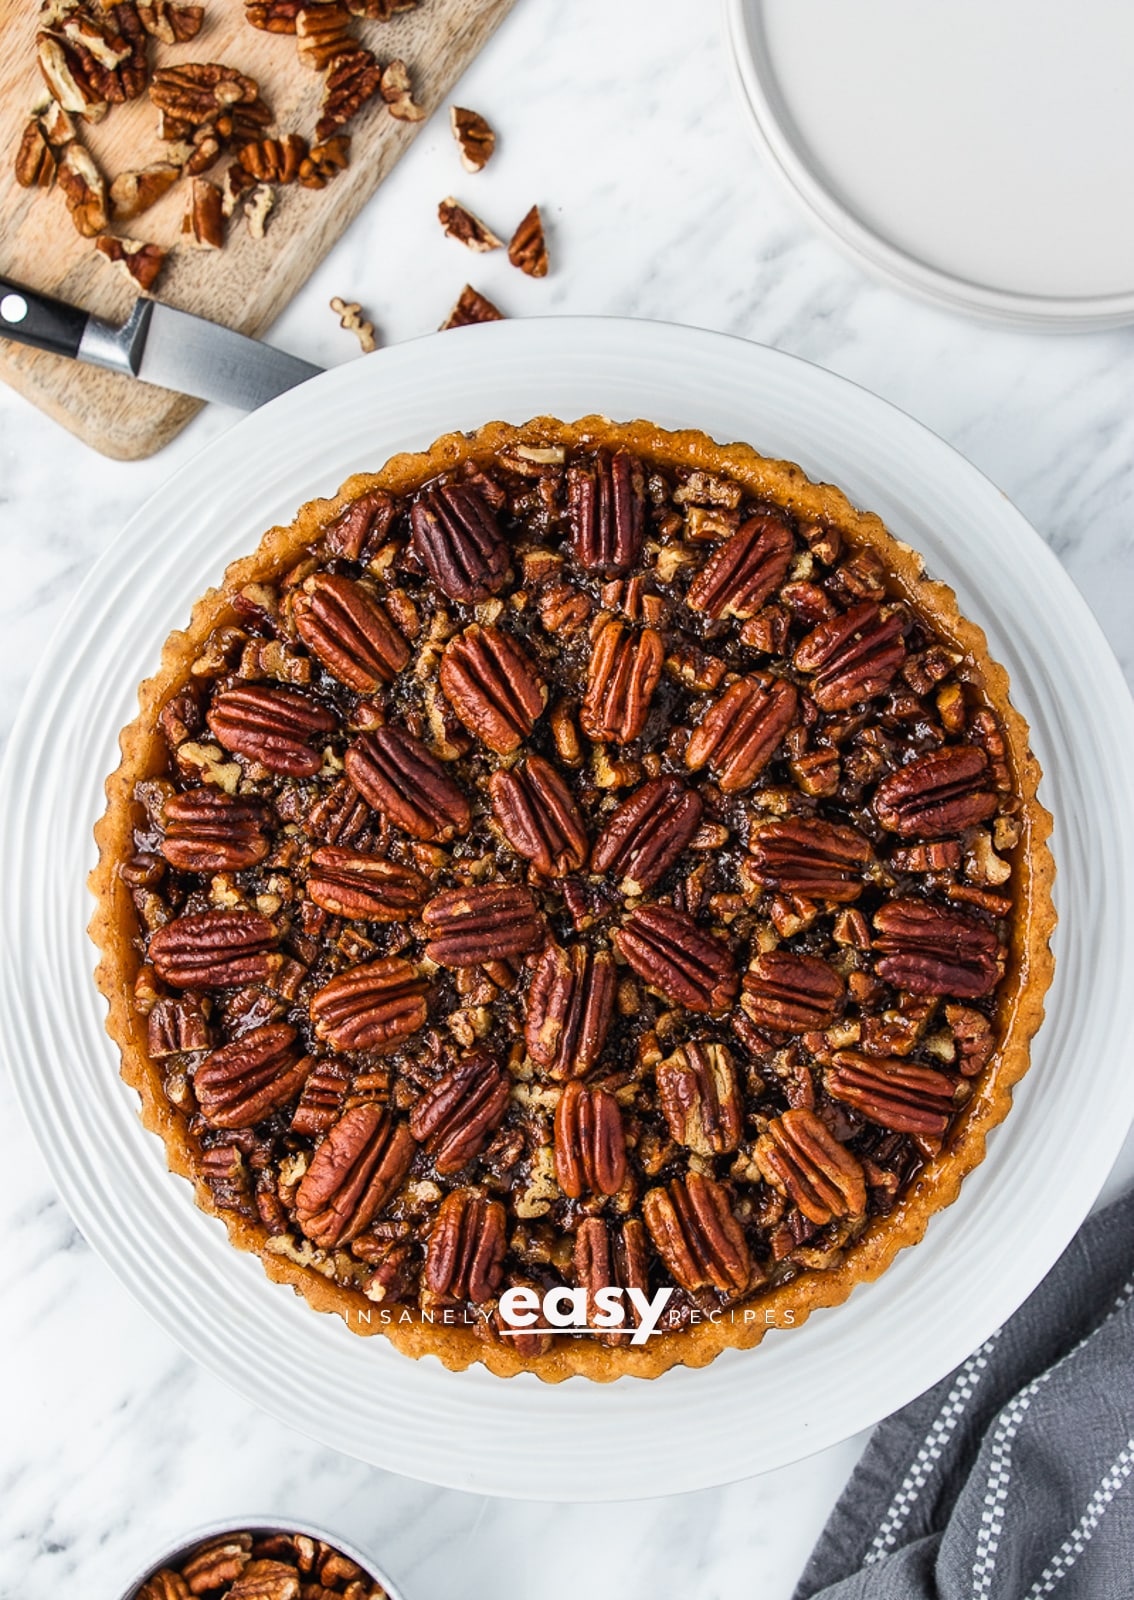 top view photo of vegan pecan pie with chopped pecans and knife above the pie, and a blue kitchen towel to the bottom of the pie